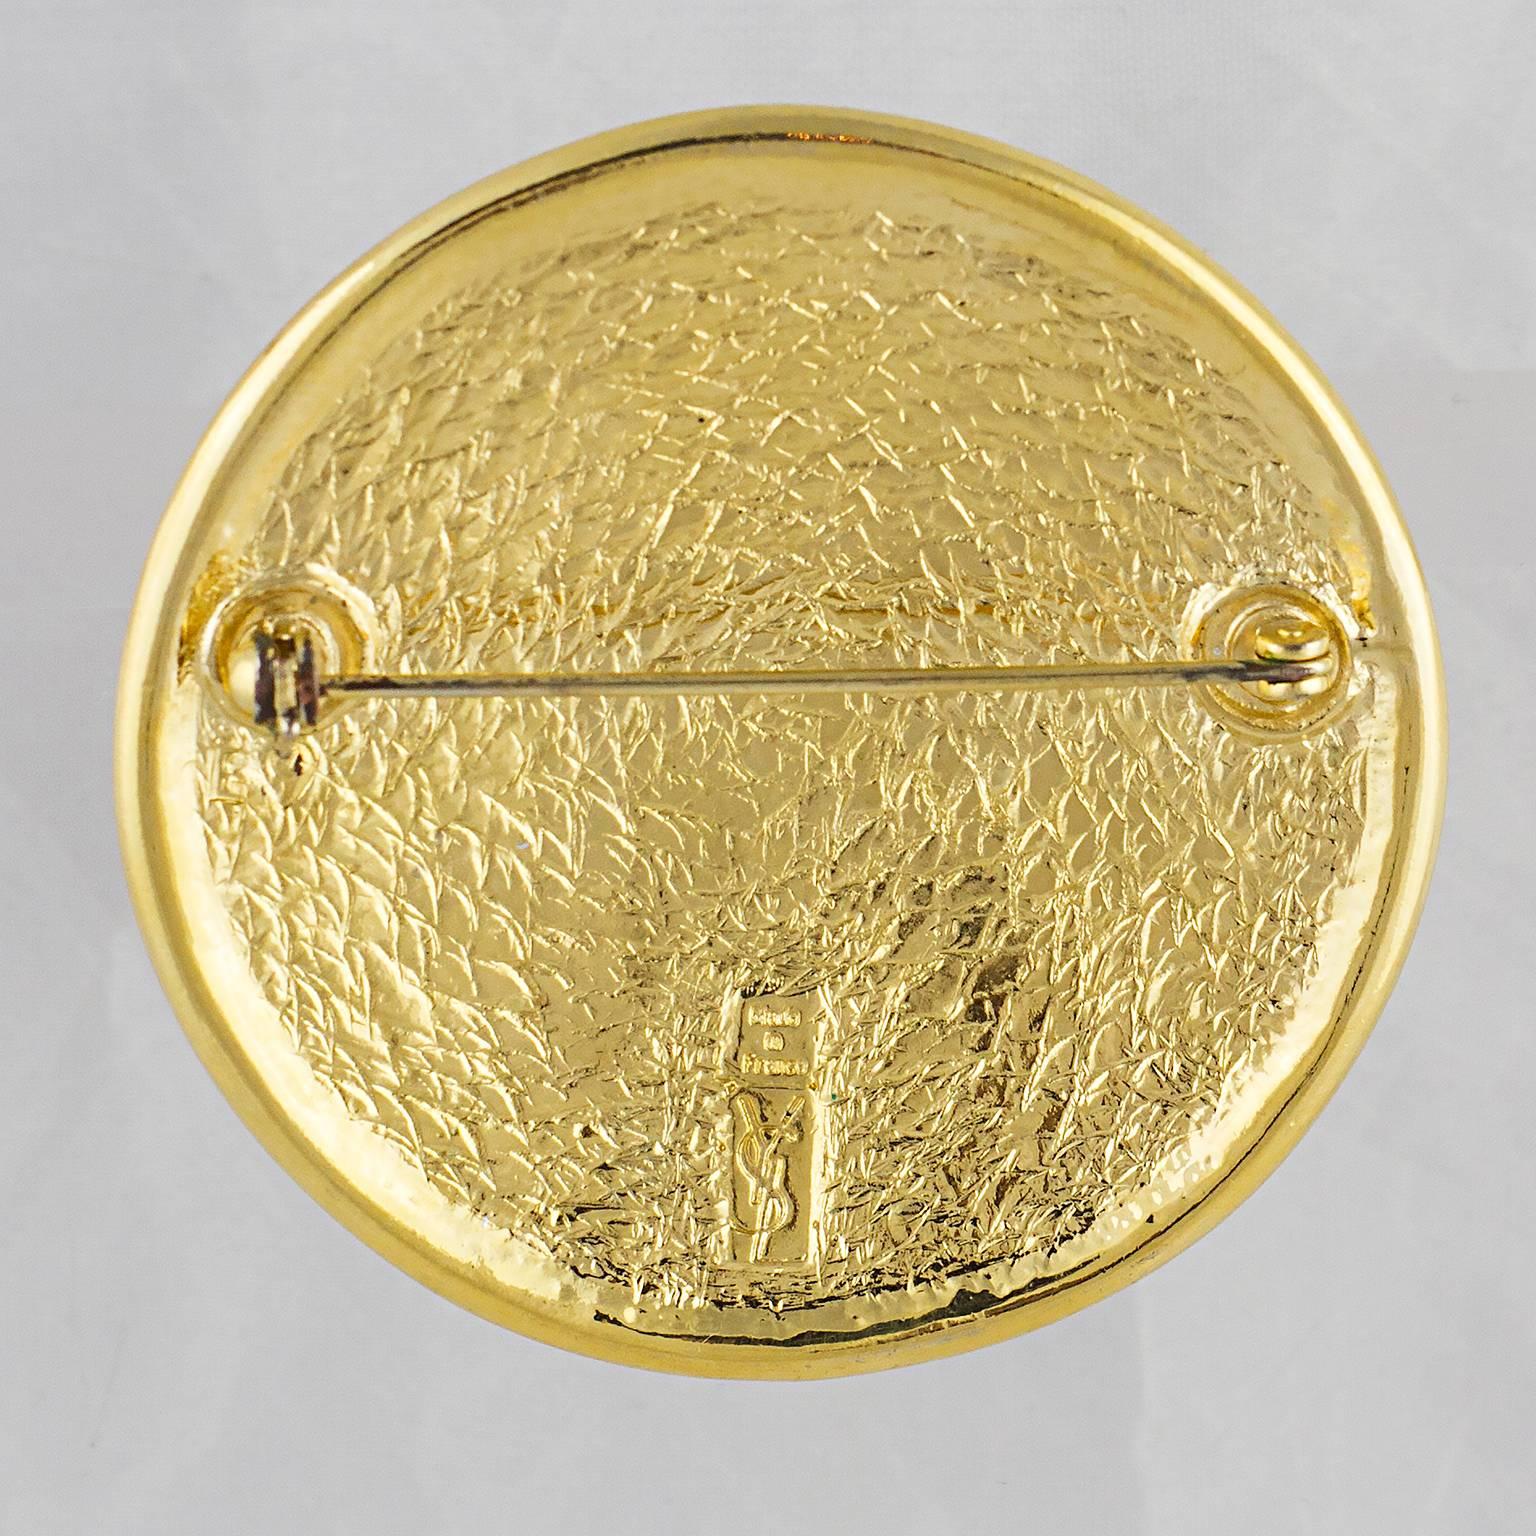 Yves Saint Laurent round brooch featuring Aztec inspired detail.
High carat gold plated metal.
Made in France in the 1980's